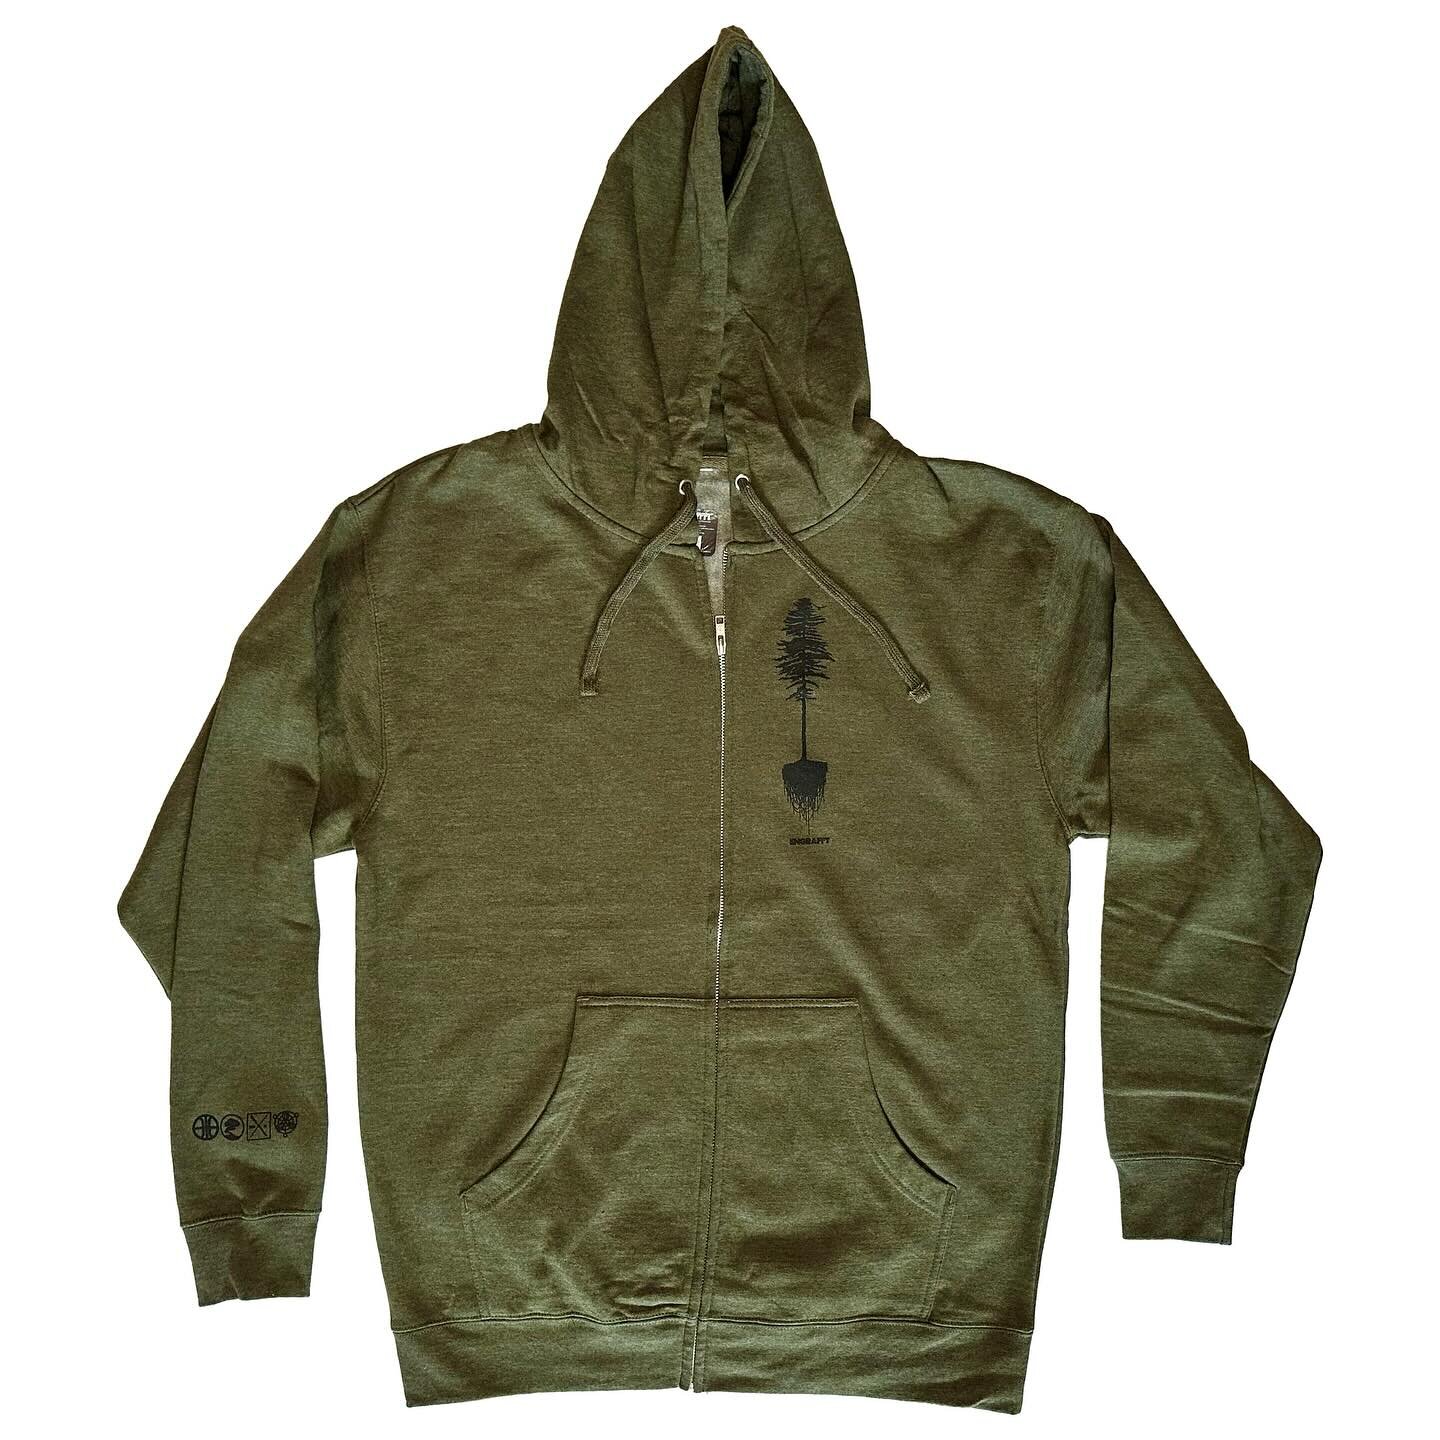 Since so many of you love the Army Heather colorway of the Grafted Redwood Crewneck.. Presenting the new Army Heather colorway of the Grafted Redwood Zip Up Hoodie! Inspired by a love of the redwoods and my West Coast roots. This high quality &ldquo;